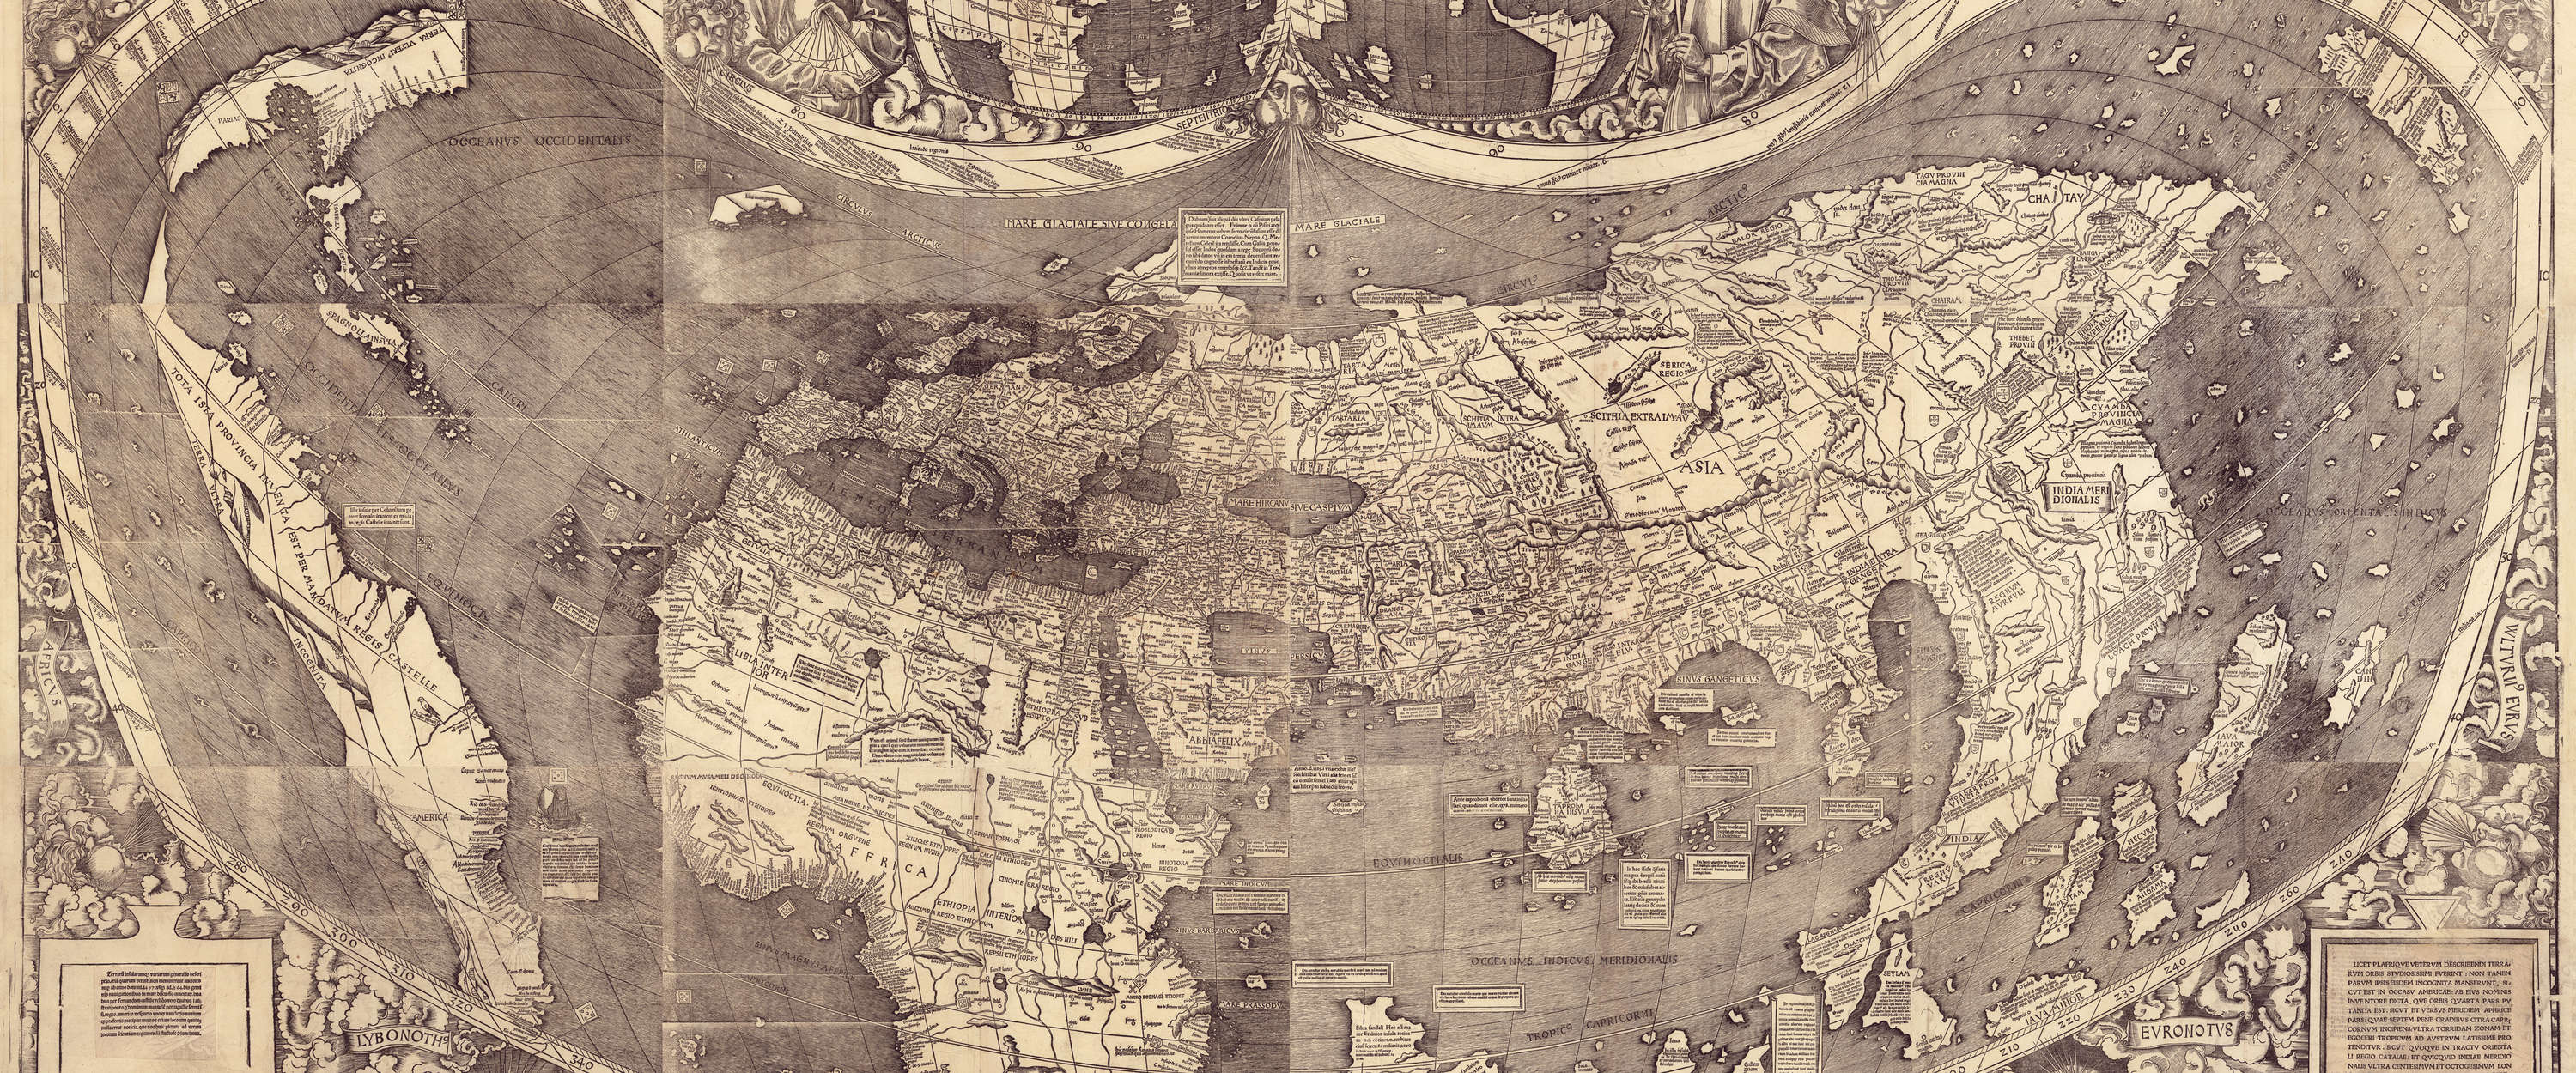             Vintage world map mural in historical style & sepia look
        